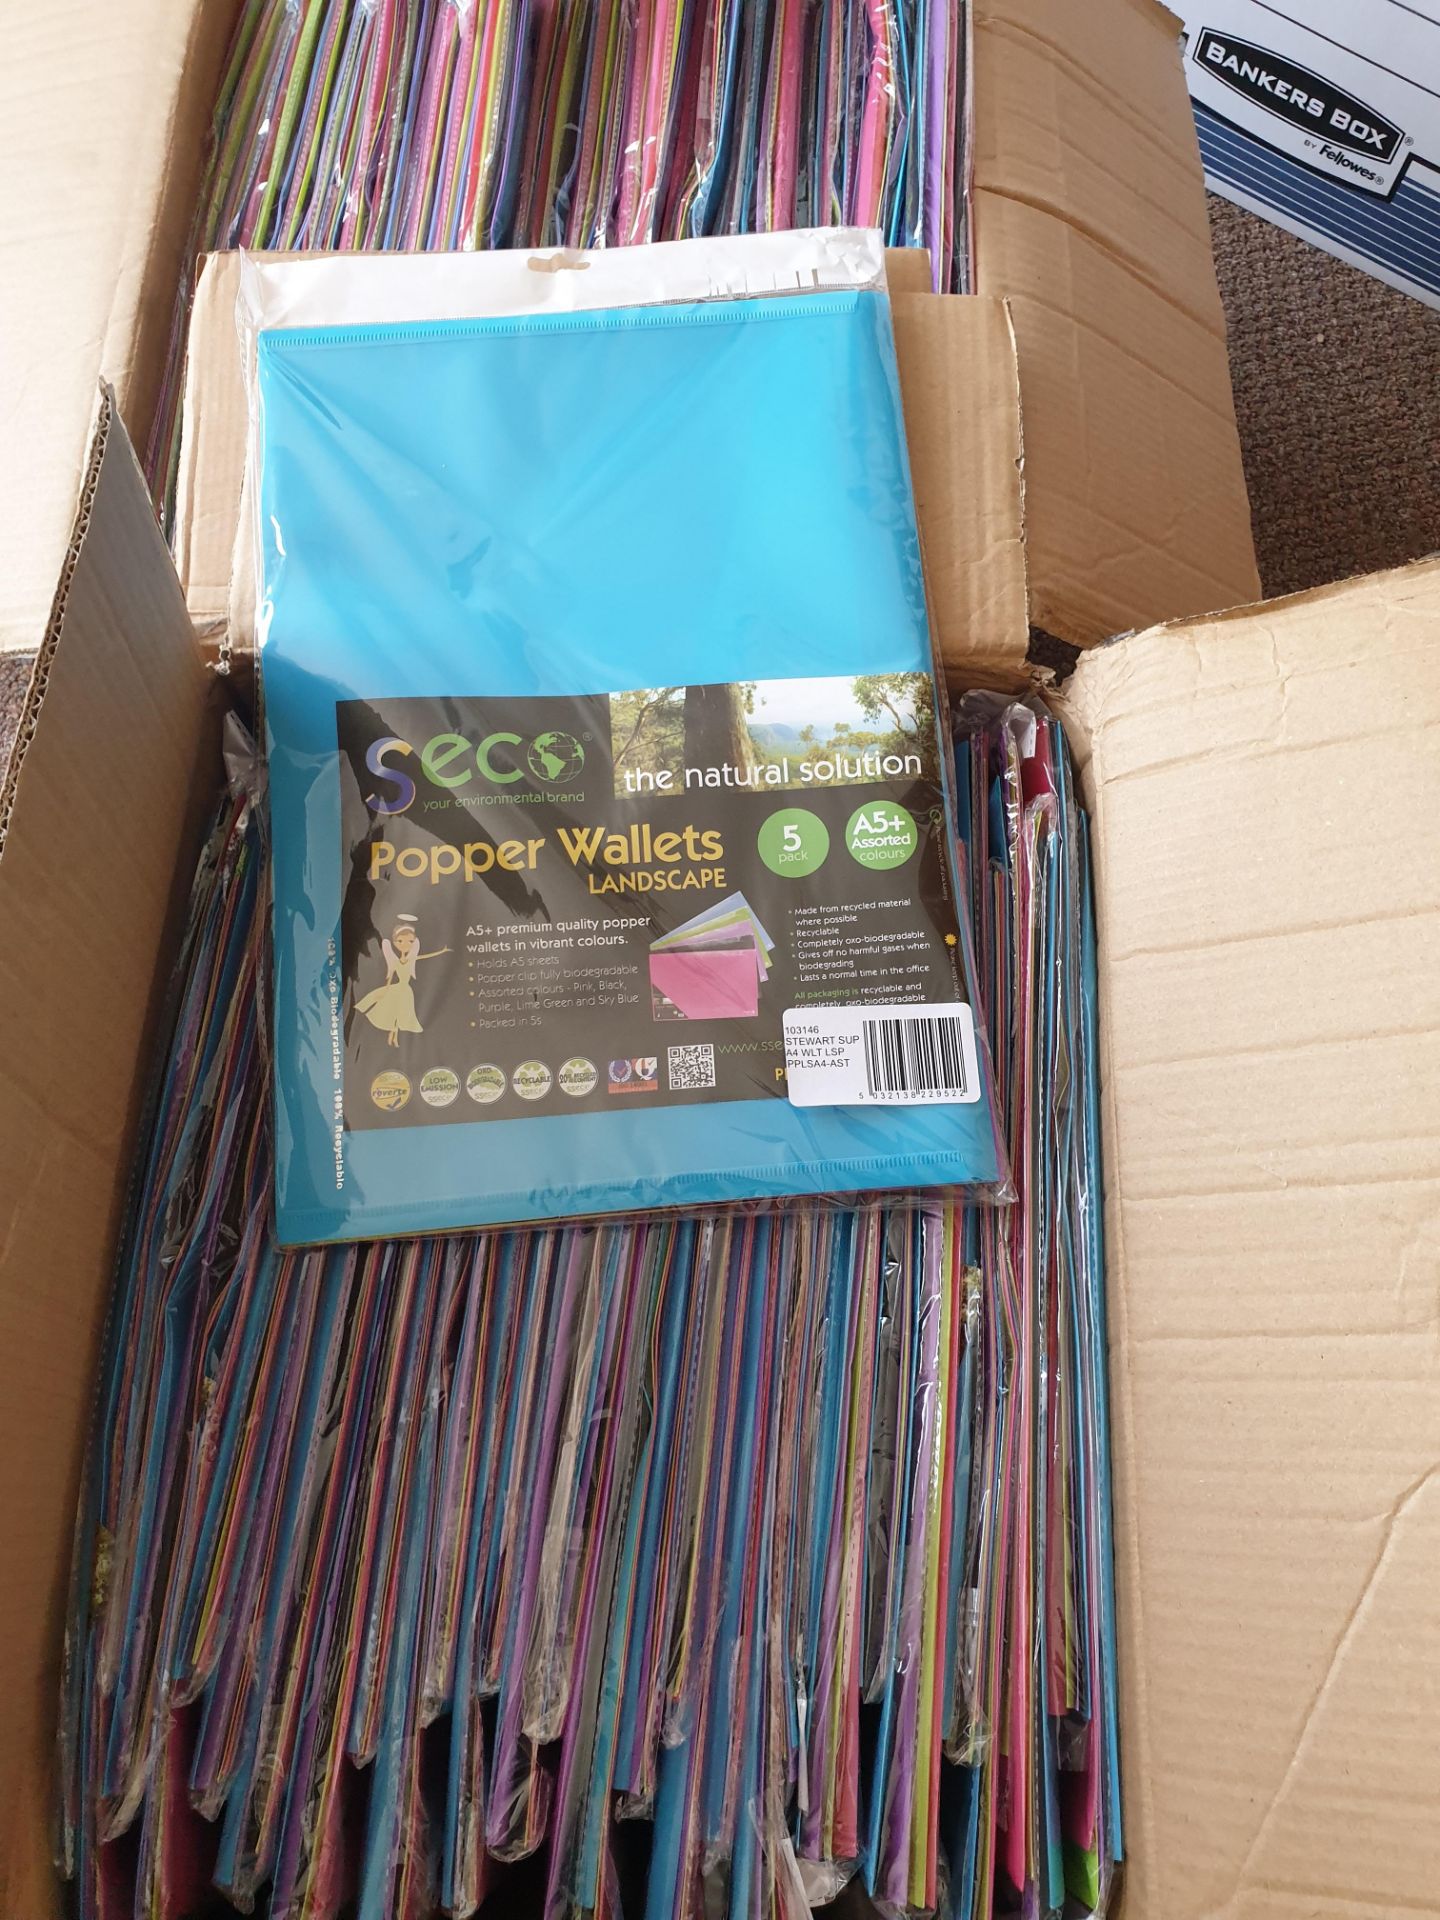 66 X Packs Of Seco Eco Popper Wallets - Image 2 of 2